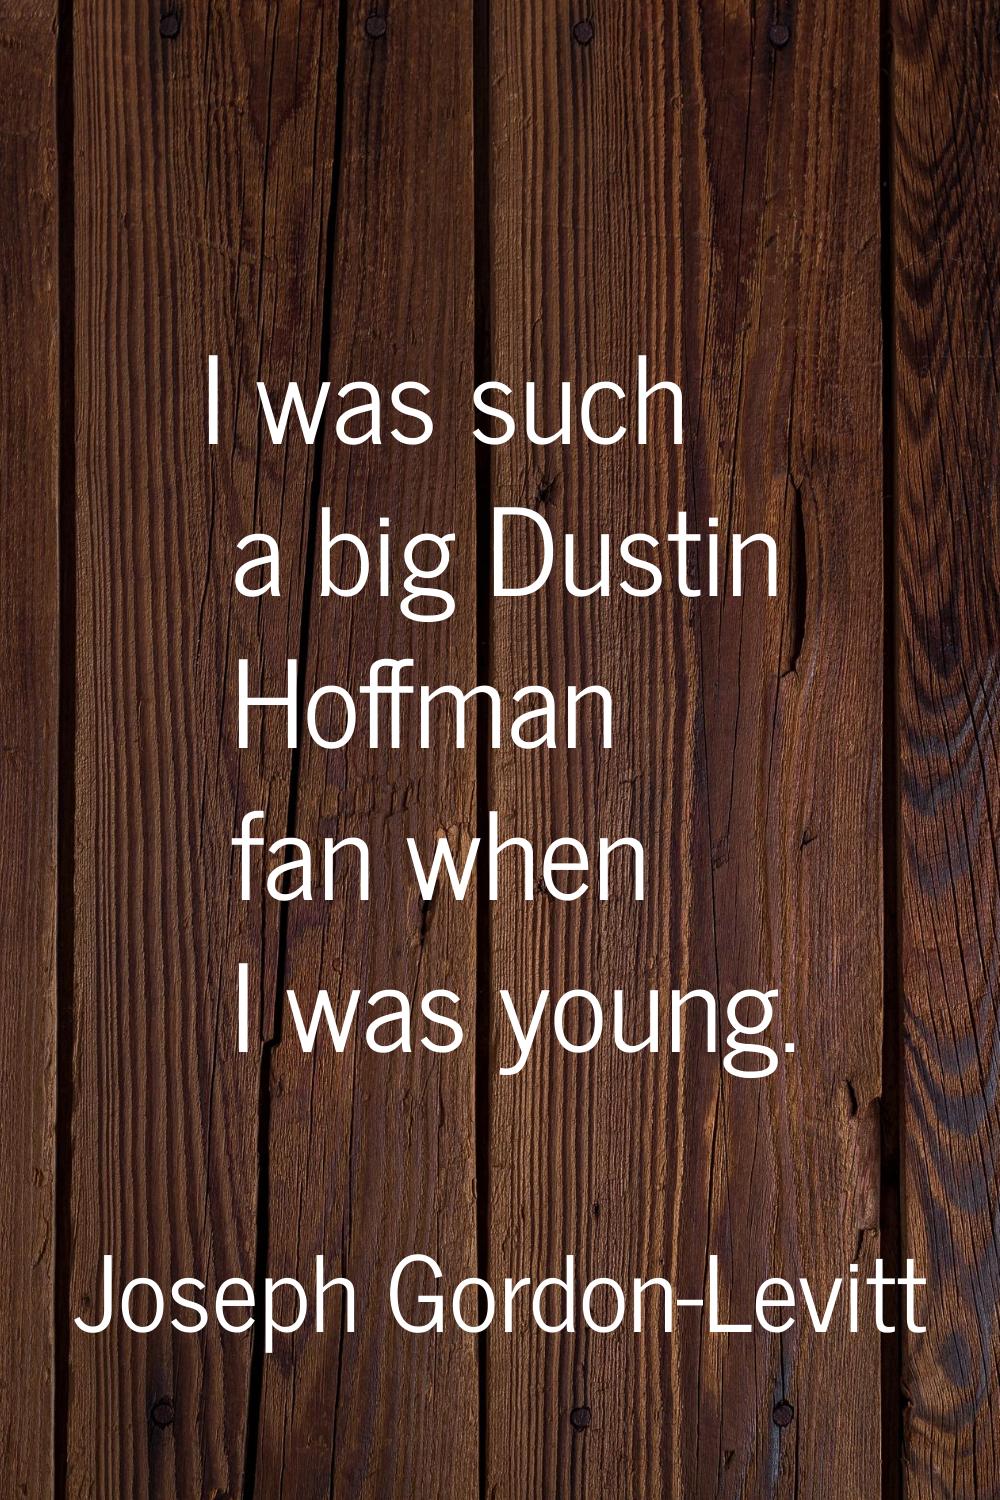 I was such a big Dustin Hoffman fan when I was young.